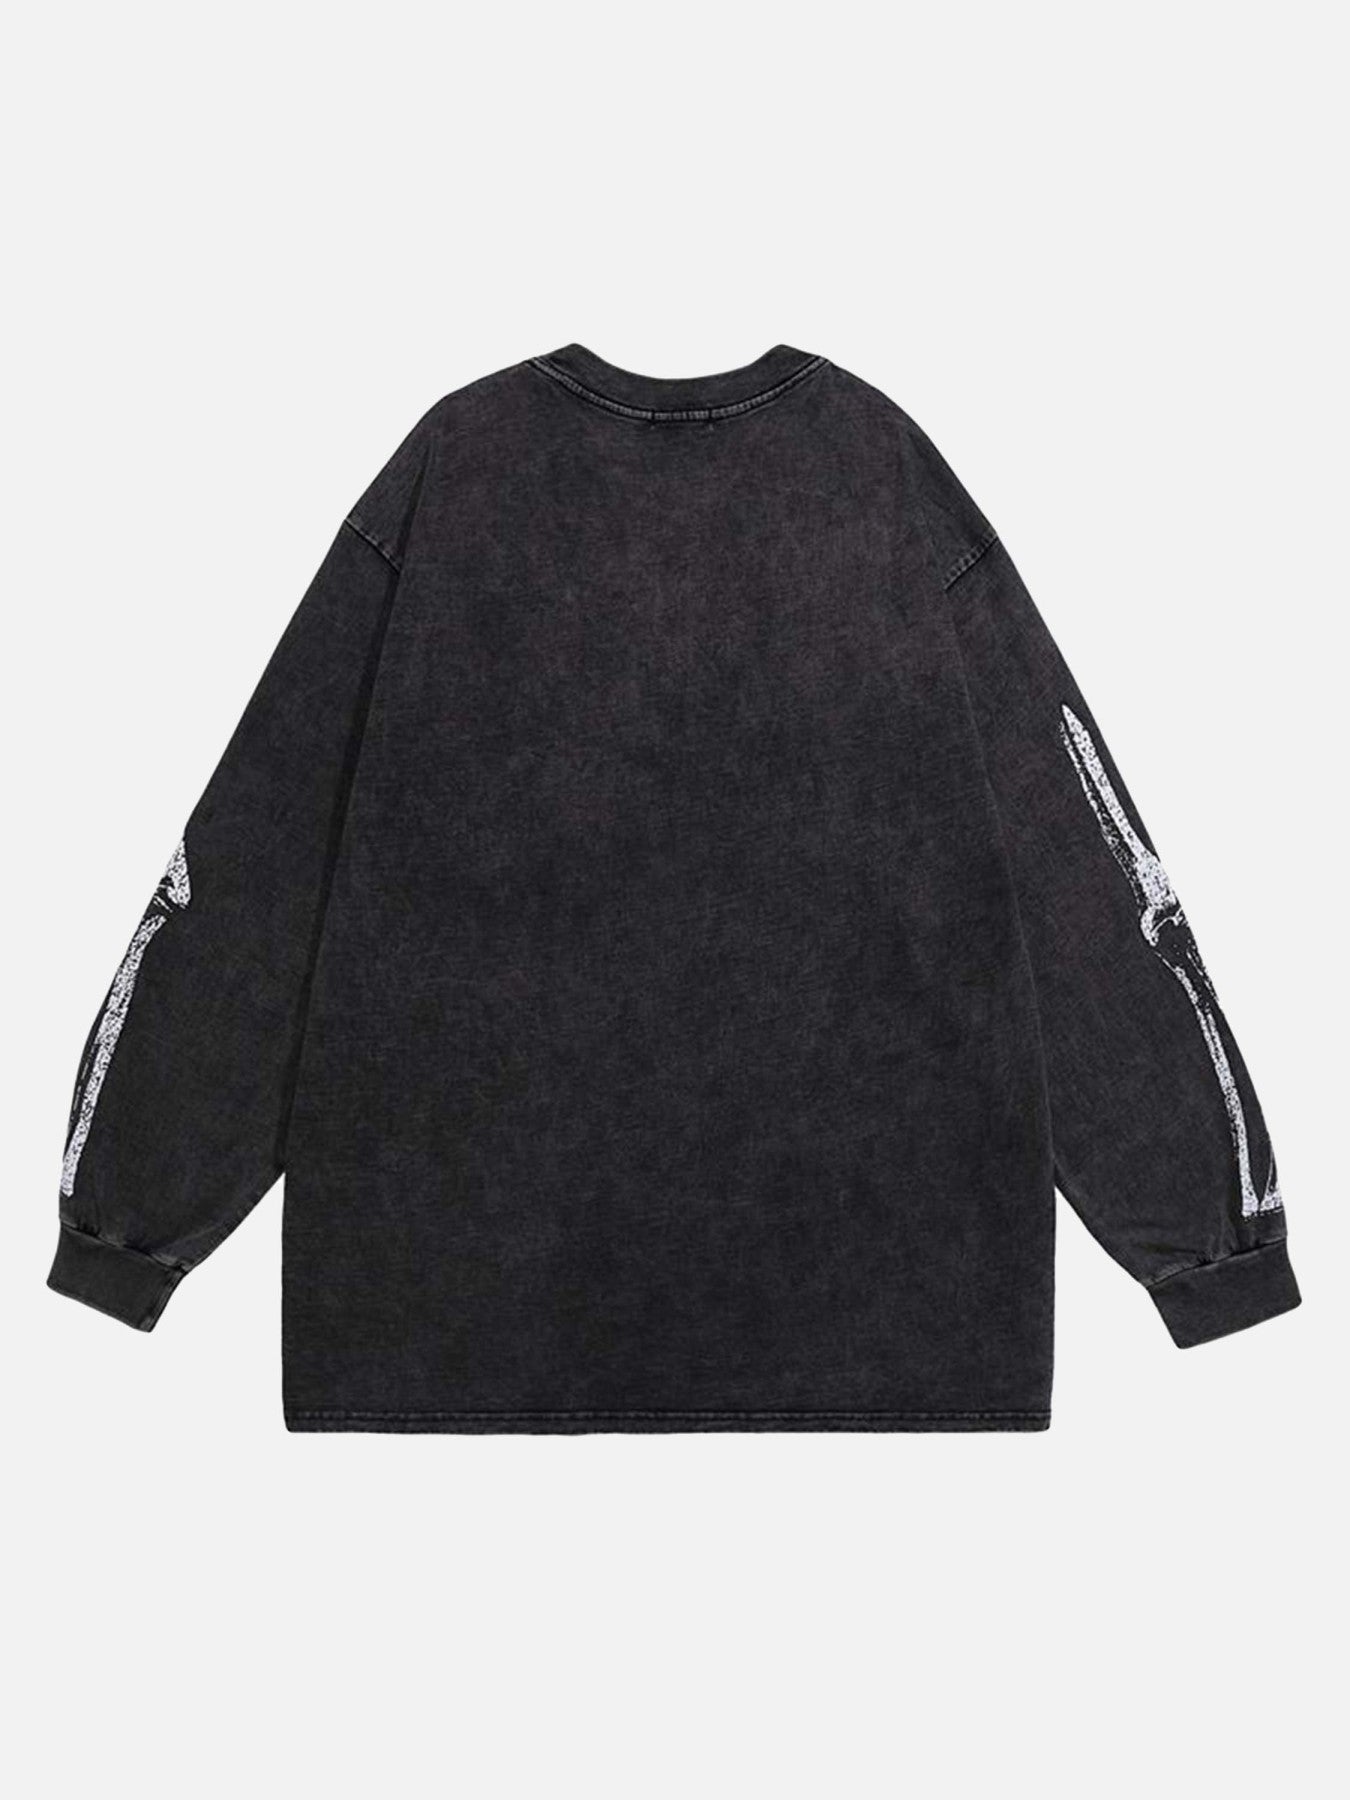 Thesupermade Washed And Aged Crew Neck Sweatshirt